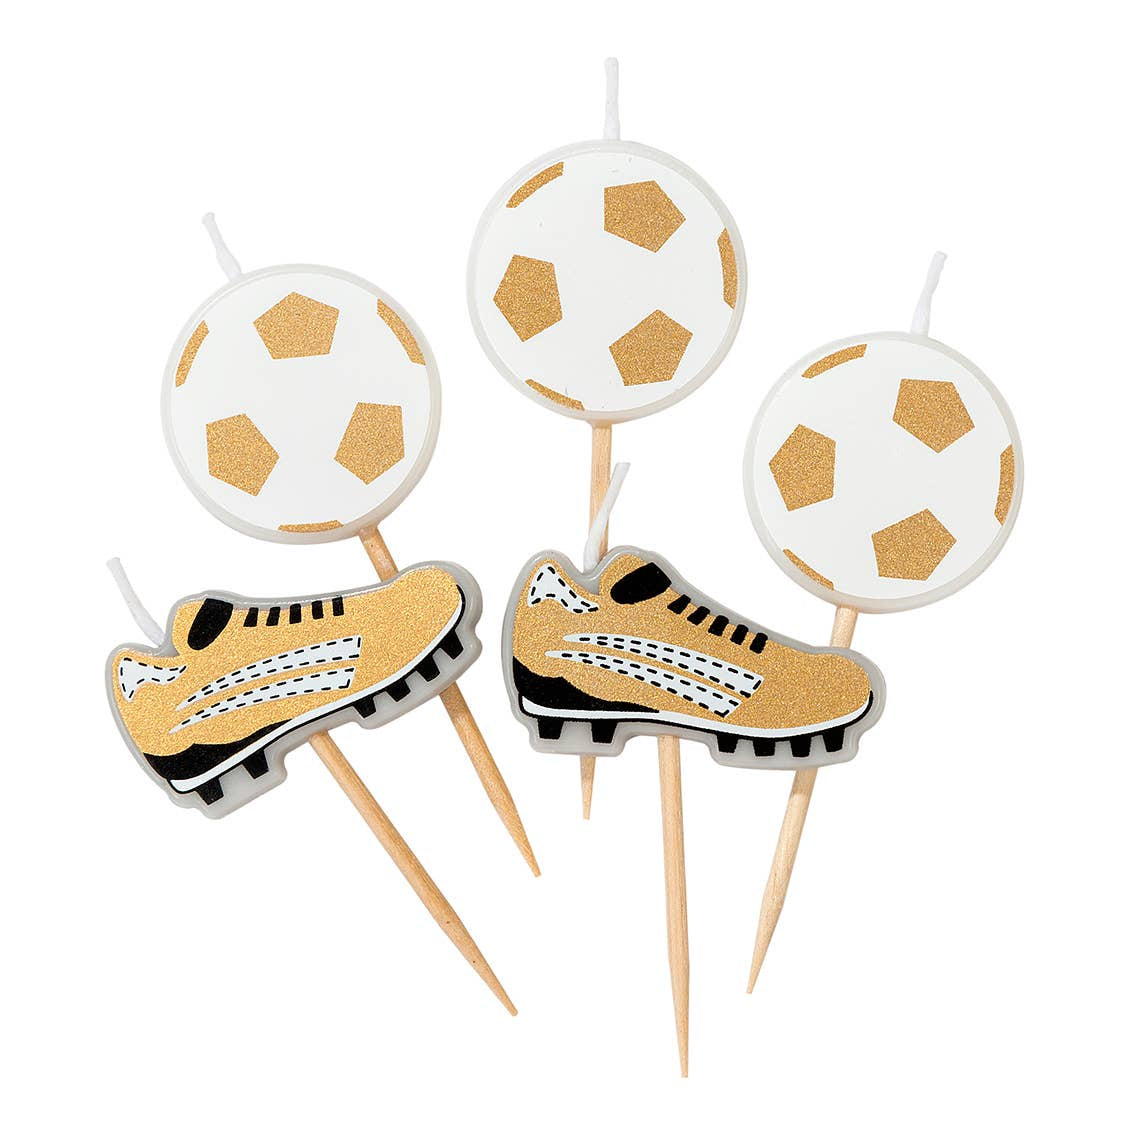 Soccer Candles - Pack of 5 Candles